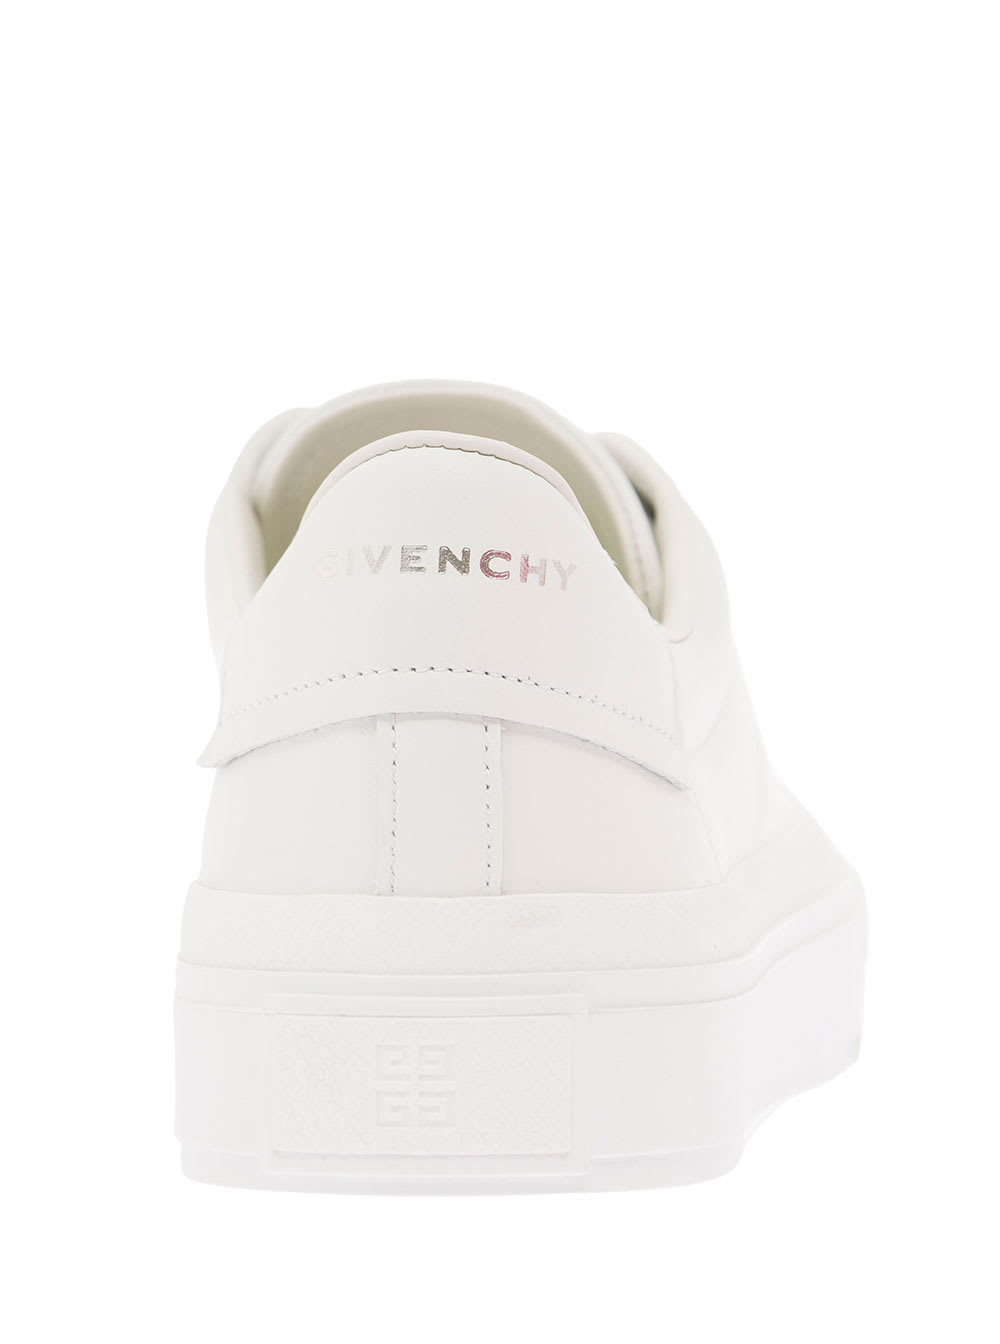 Shop Givenchy Womans City Sport White Leather Sneakers